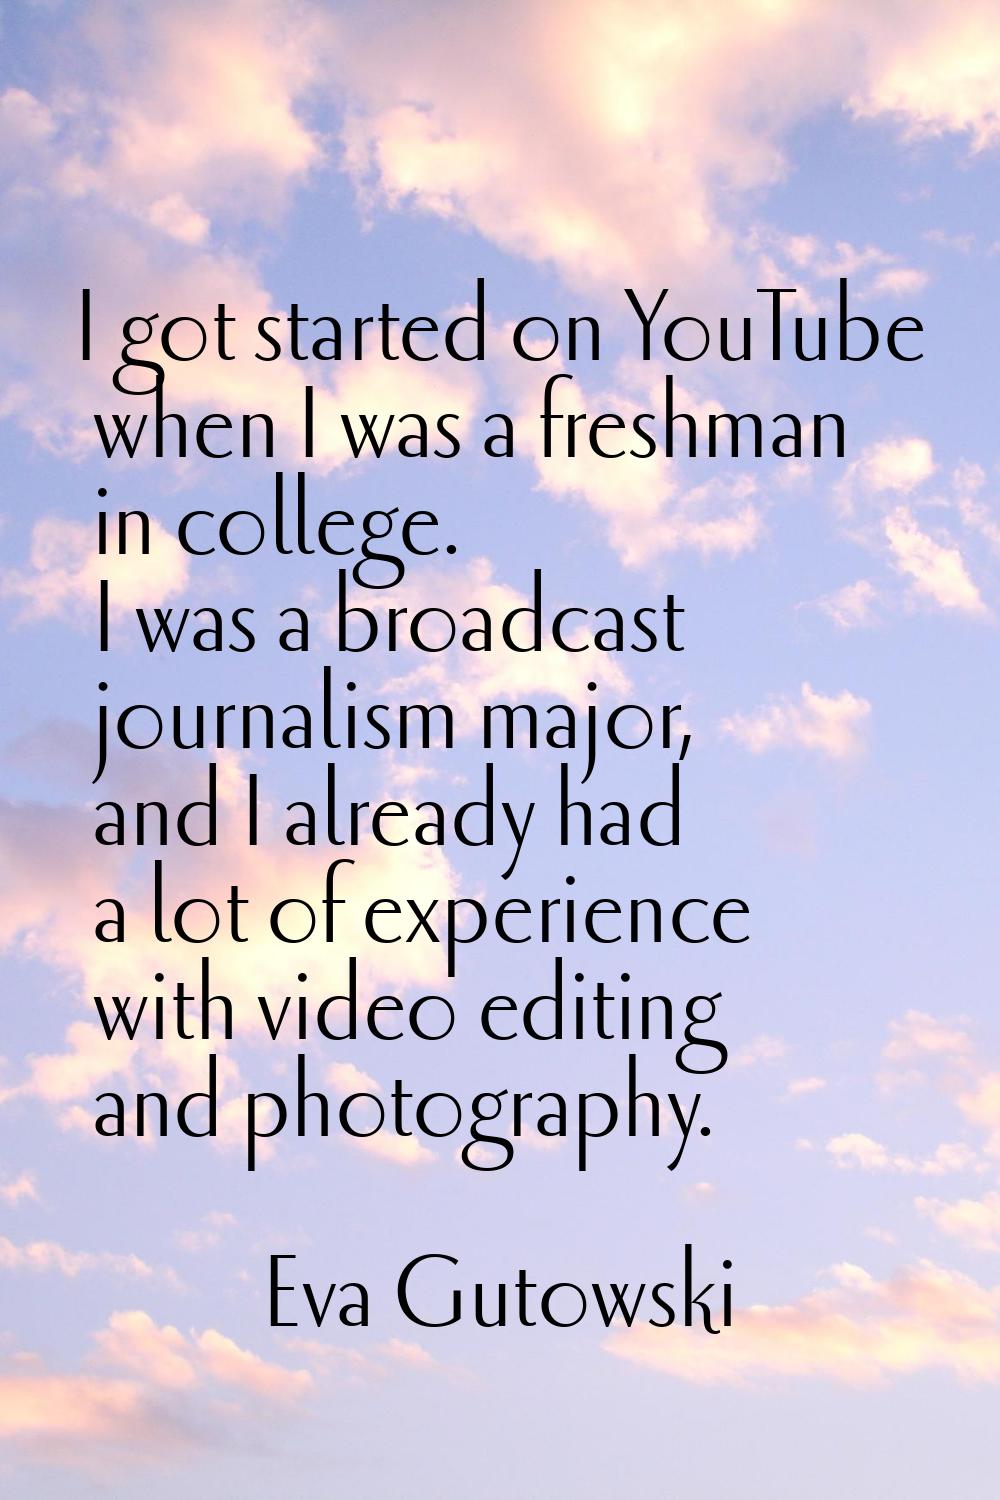 I got started on YouTube when I was a freshman in college. I was a broadcast journalism major, and 